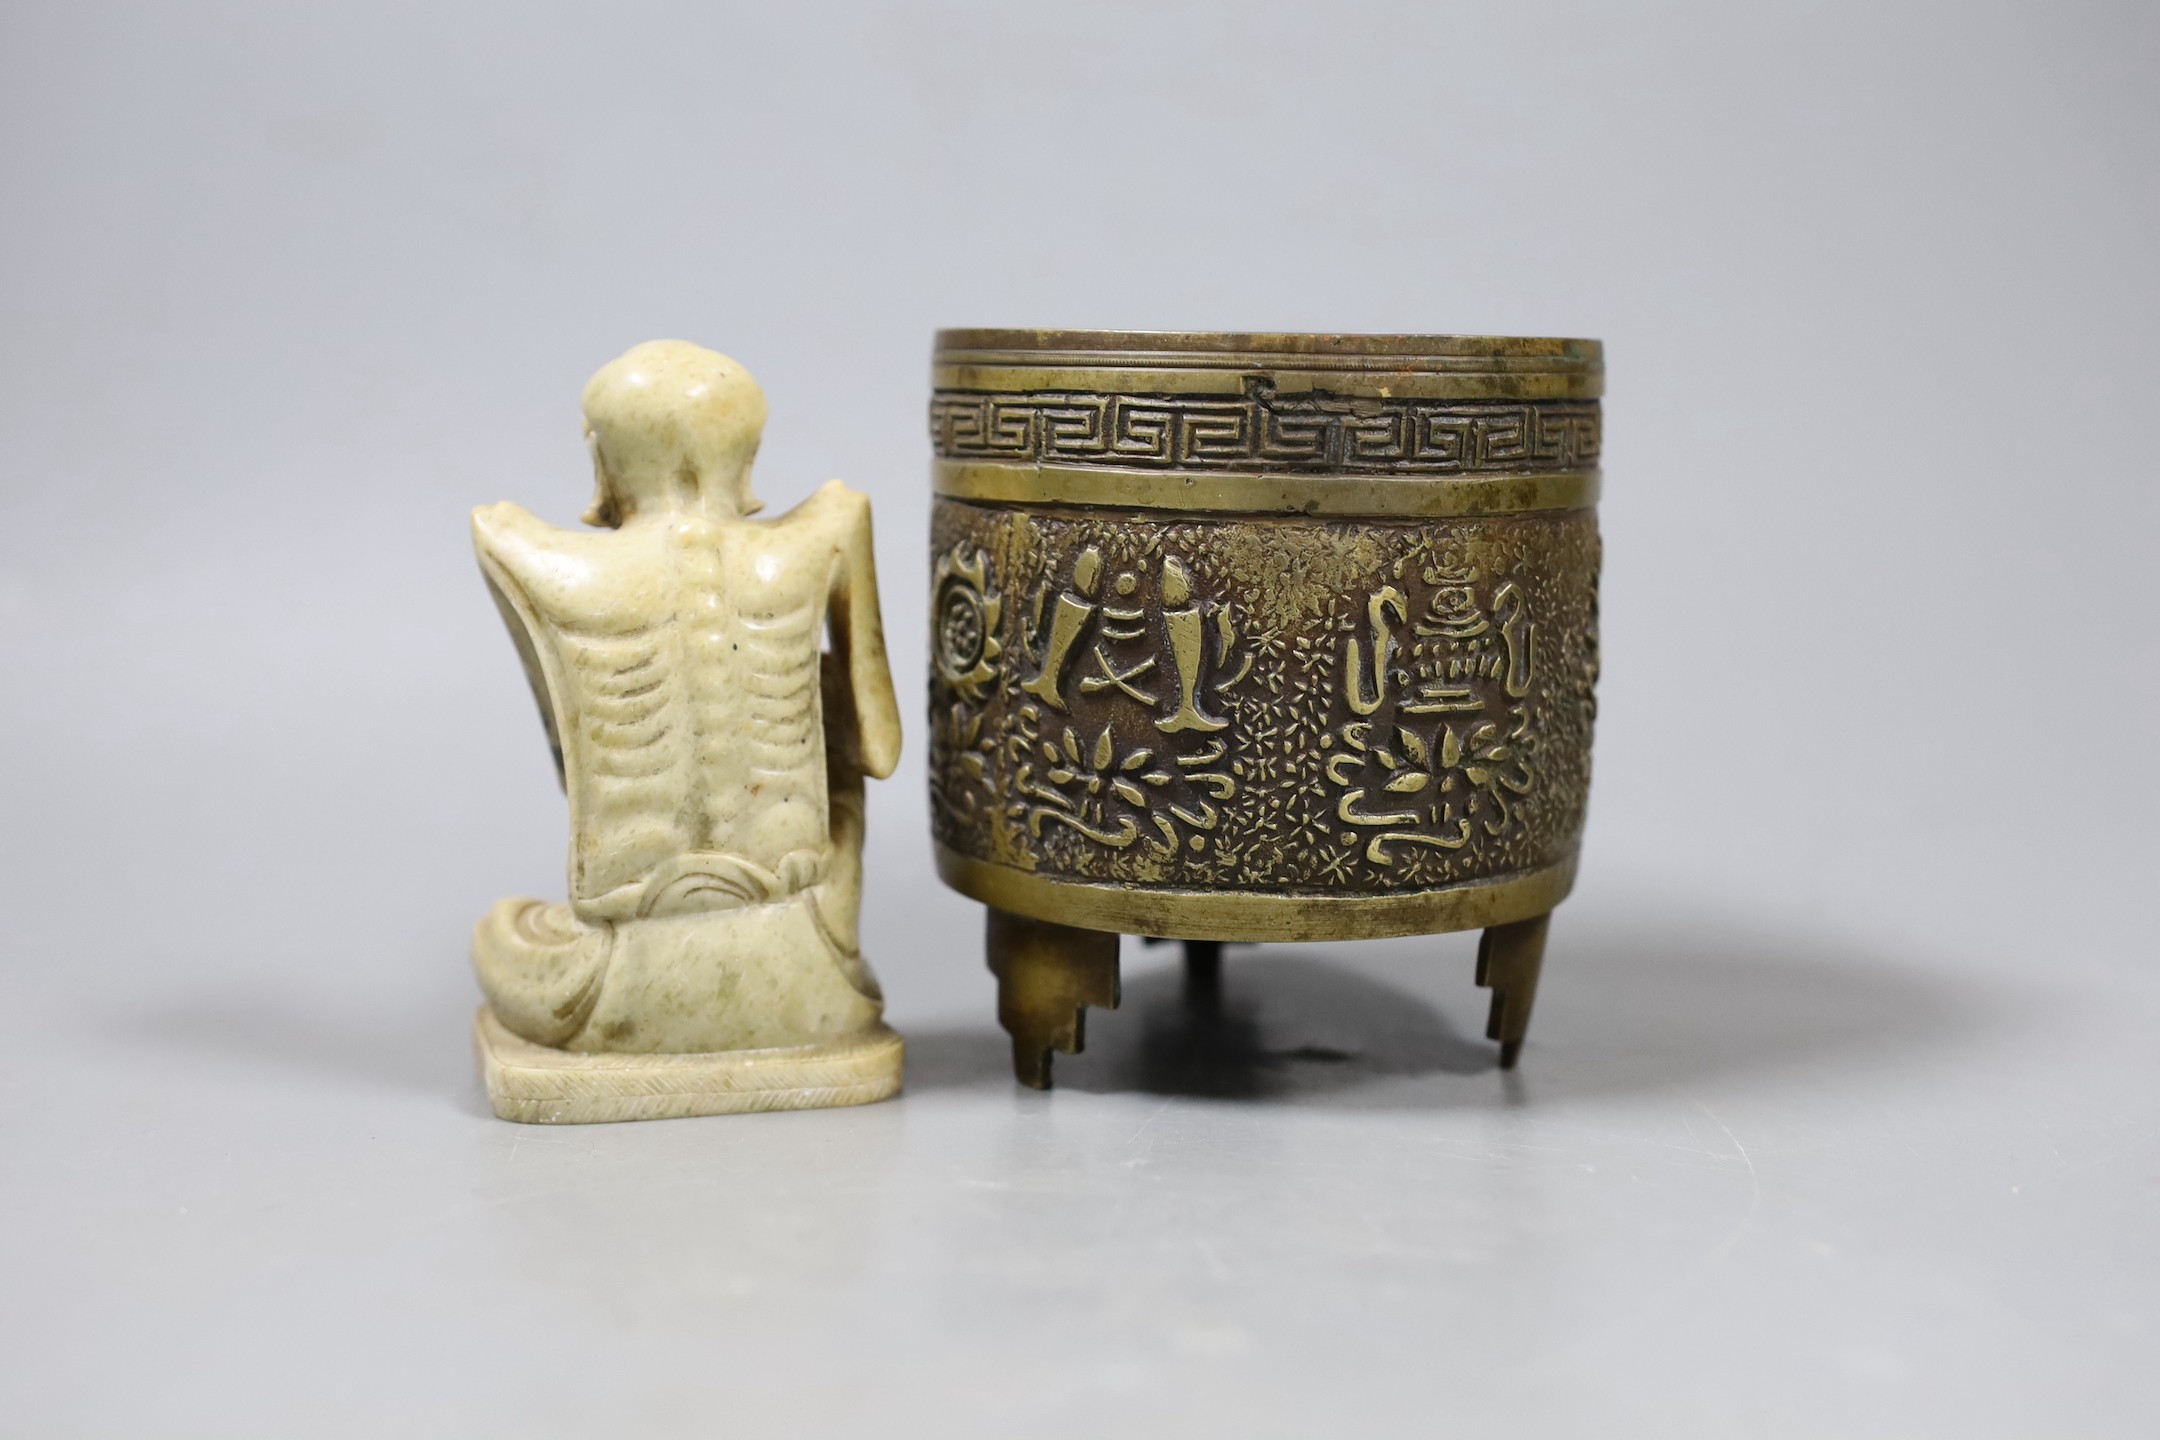 A Chinese archaistic bronze censer and a soapstone figure of a luohan, Tallest 10cm - Image 2 of 4